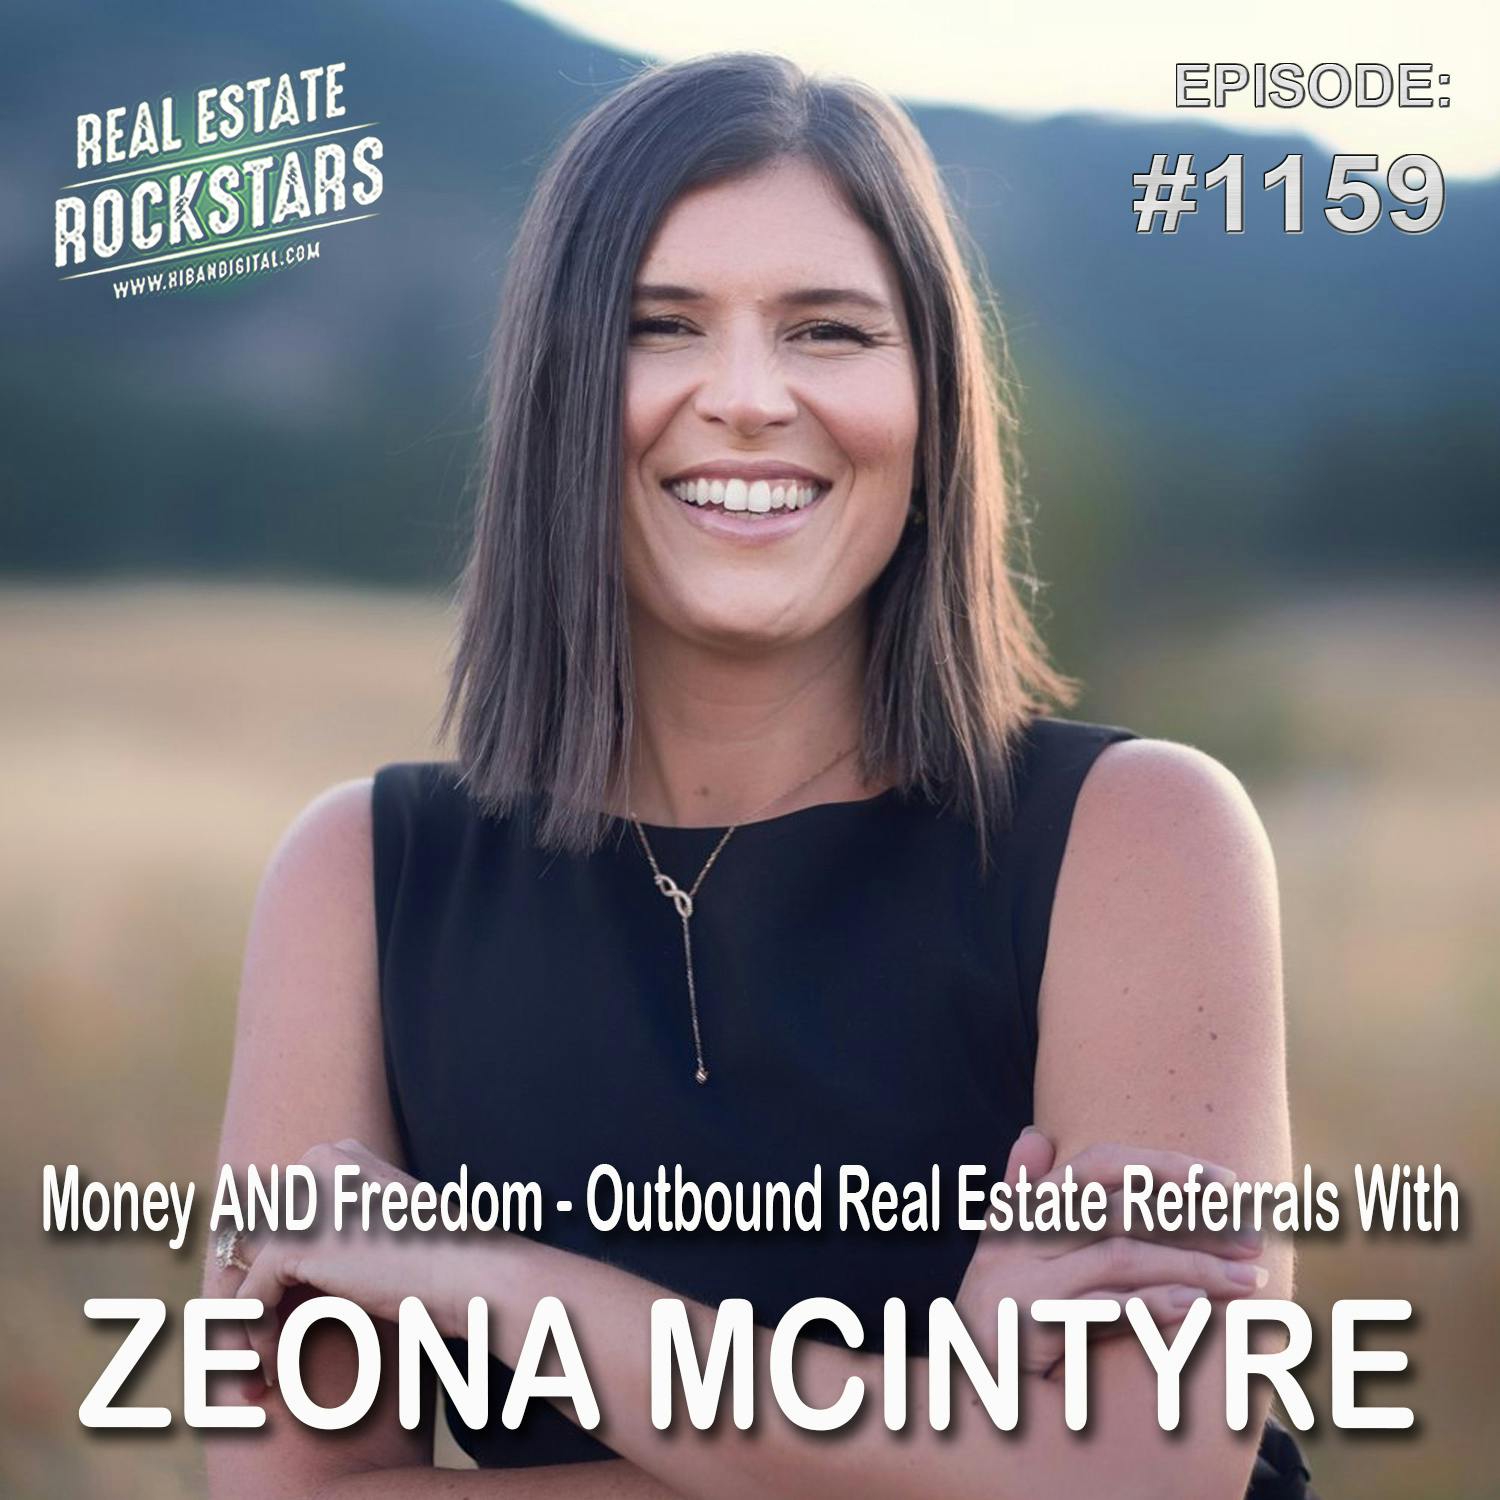 1159: Money AND Freedom - Outbound Real Estate Referrals With Zeona McIntyre